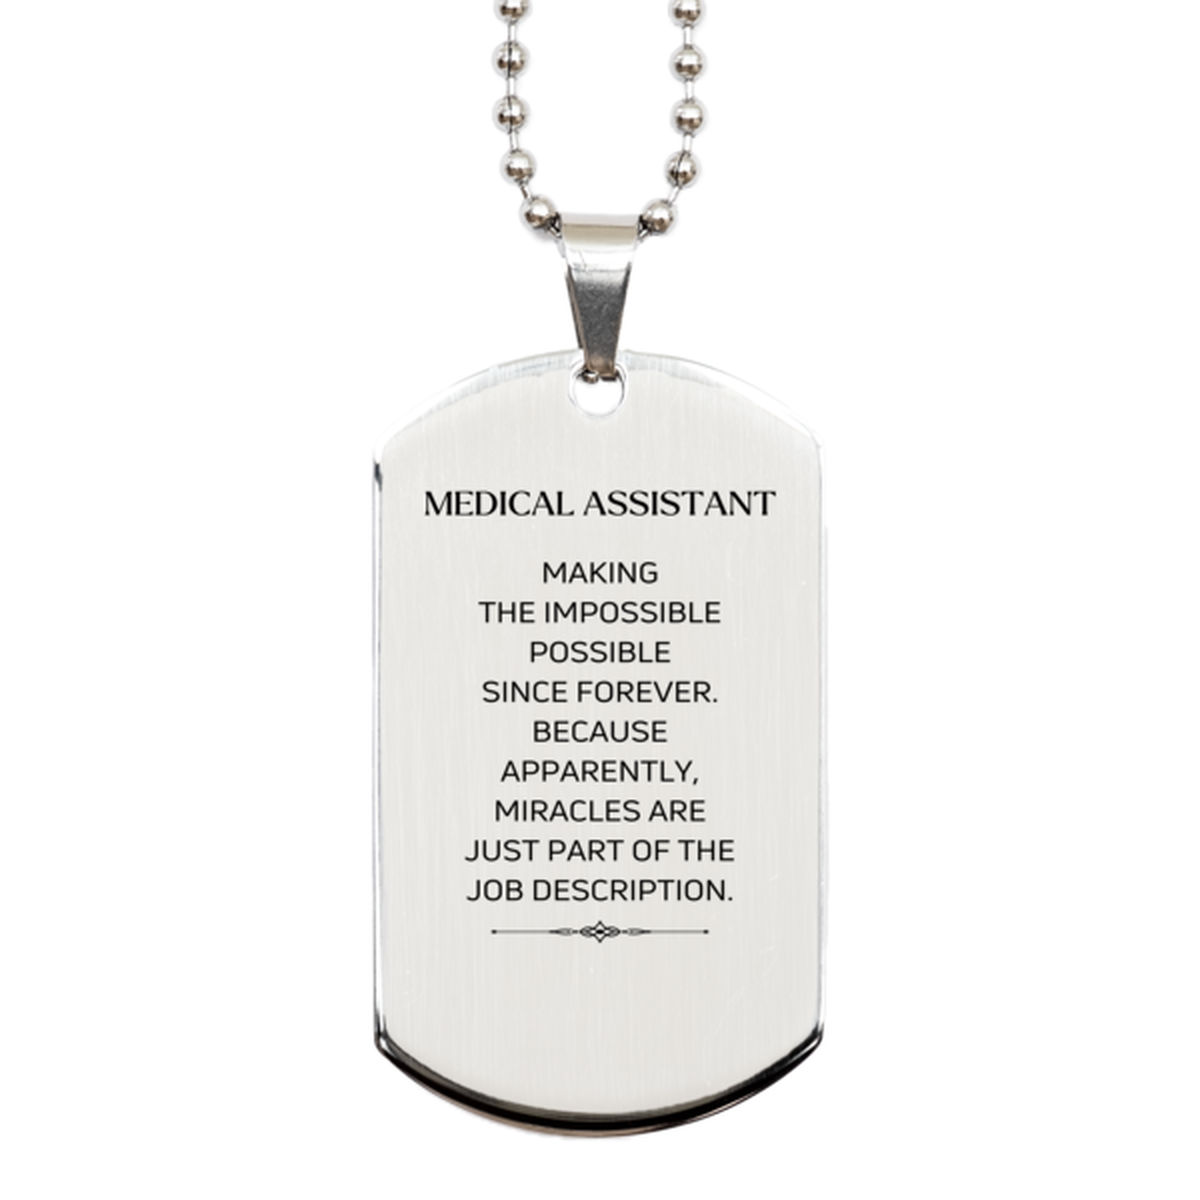 Funny Medical Assistant Gifts, Miracles are just part of the job description, Inspirational Birthday Silver Dog Tag For Medical Assistant, Men, Women, Coworkers, Friends, Boss